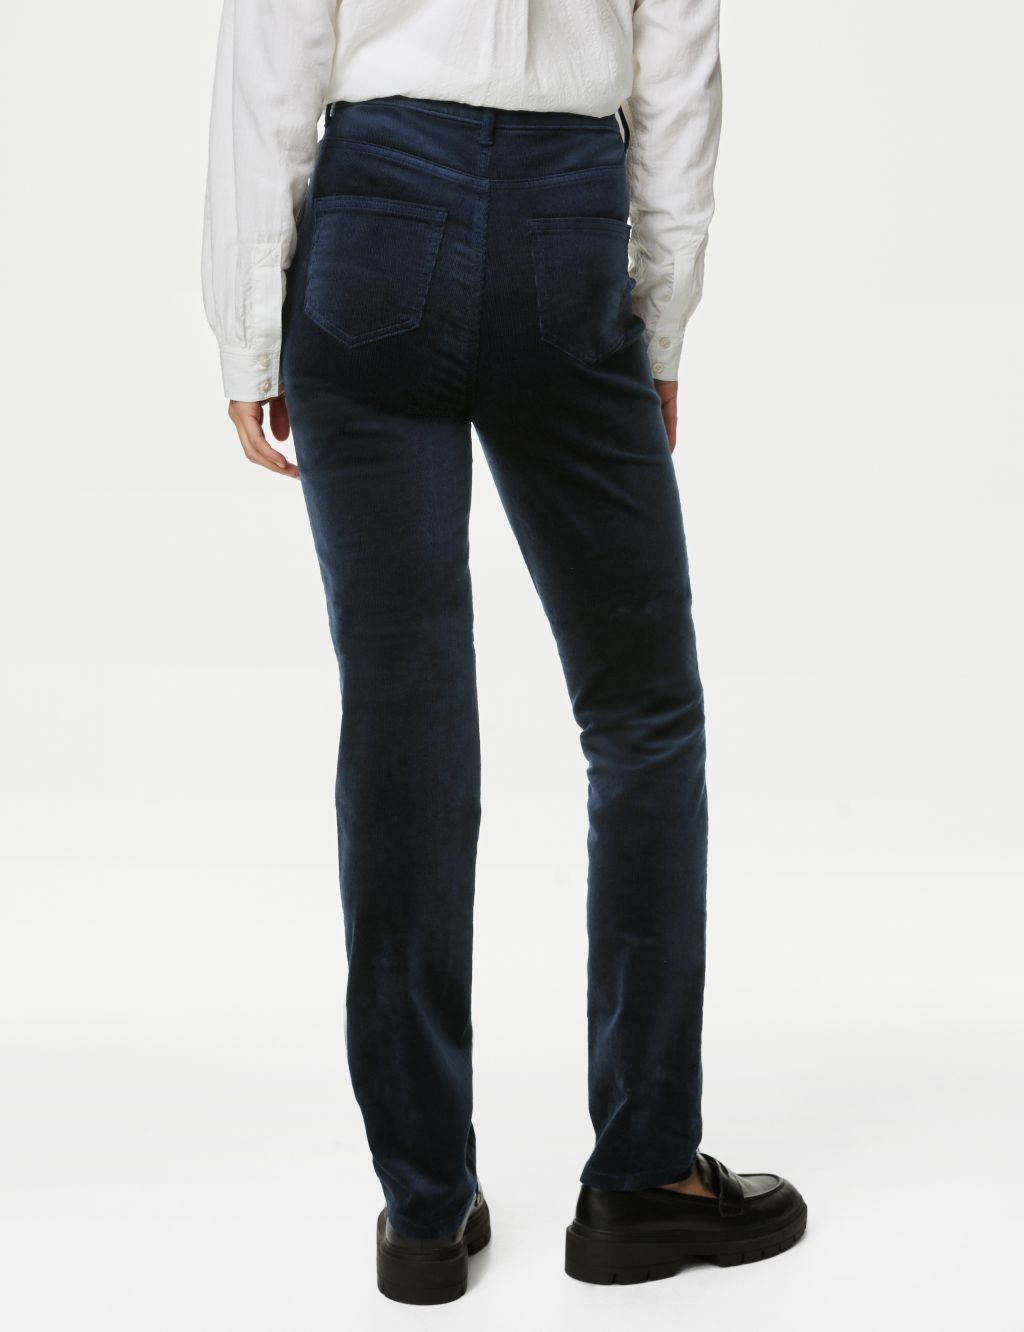 Cord Straight Leg Trousers image 5